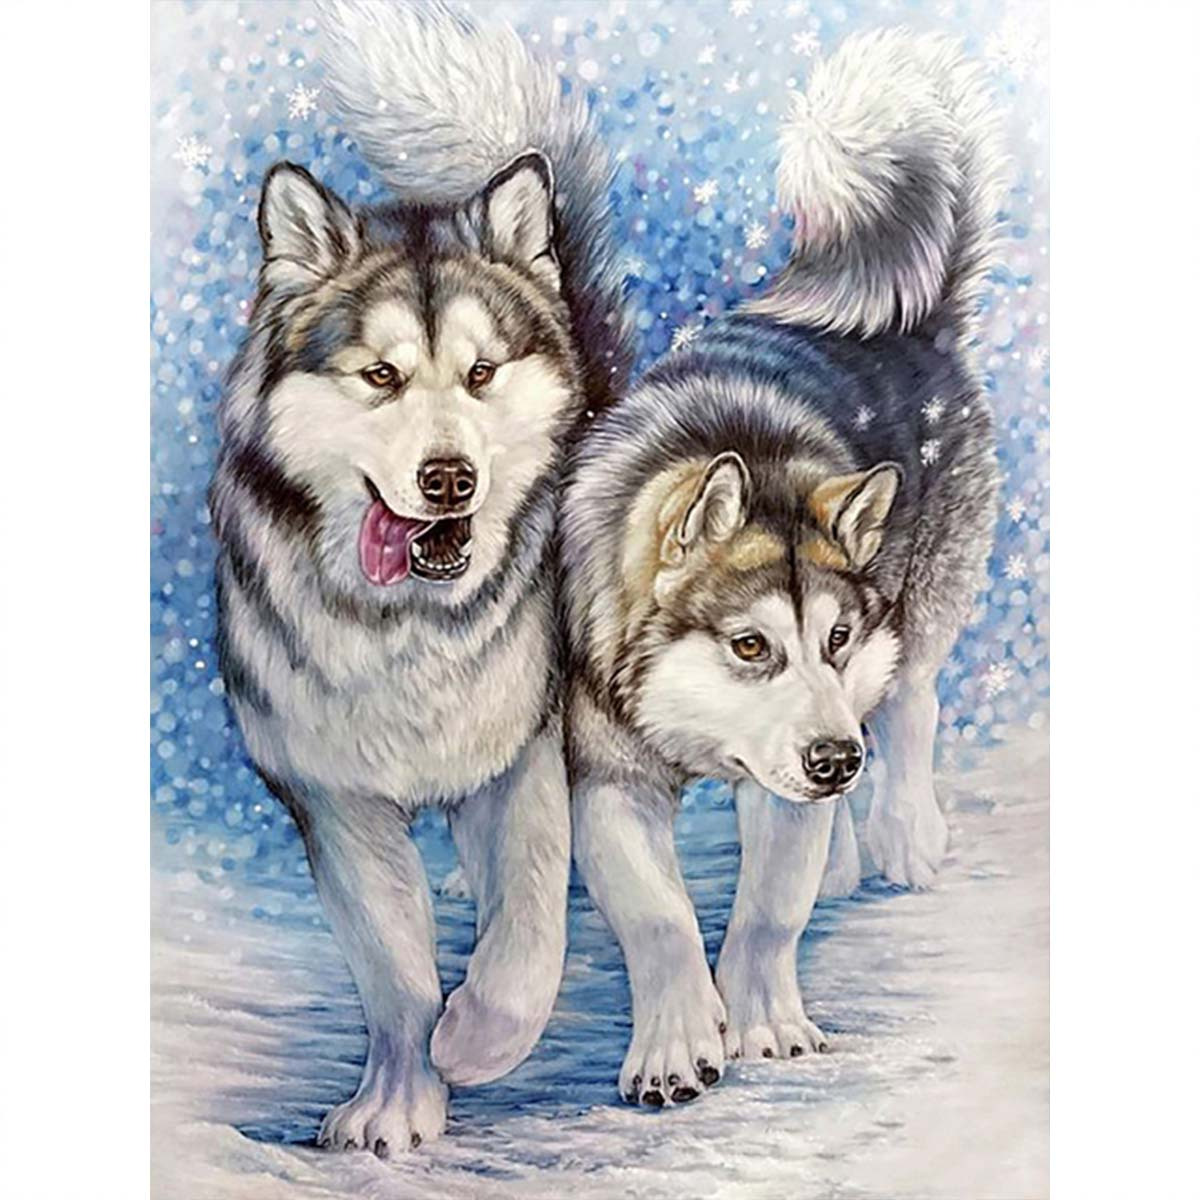 

1pc 5d Artificial Diamond Painting Kits Rhinestones Art For Adults Beginners, Couple Wolf 5d Full Round Rhinestones Painting For Gift Home Wall Decor, 20x30cm/7.9x11.8inch, Frameless